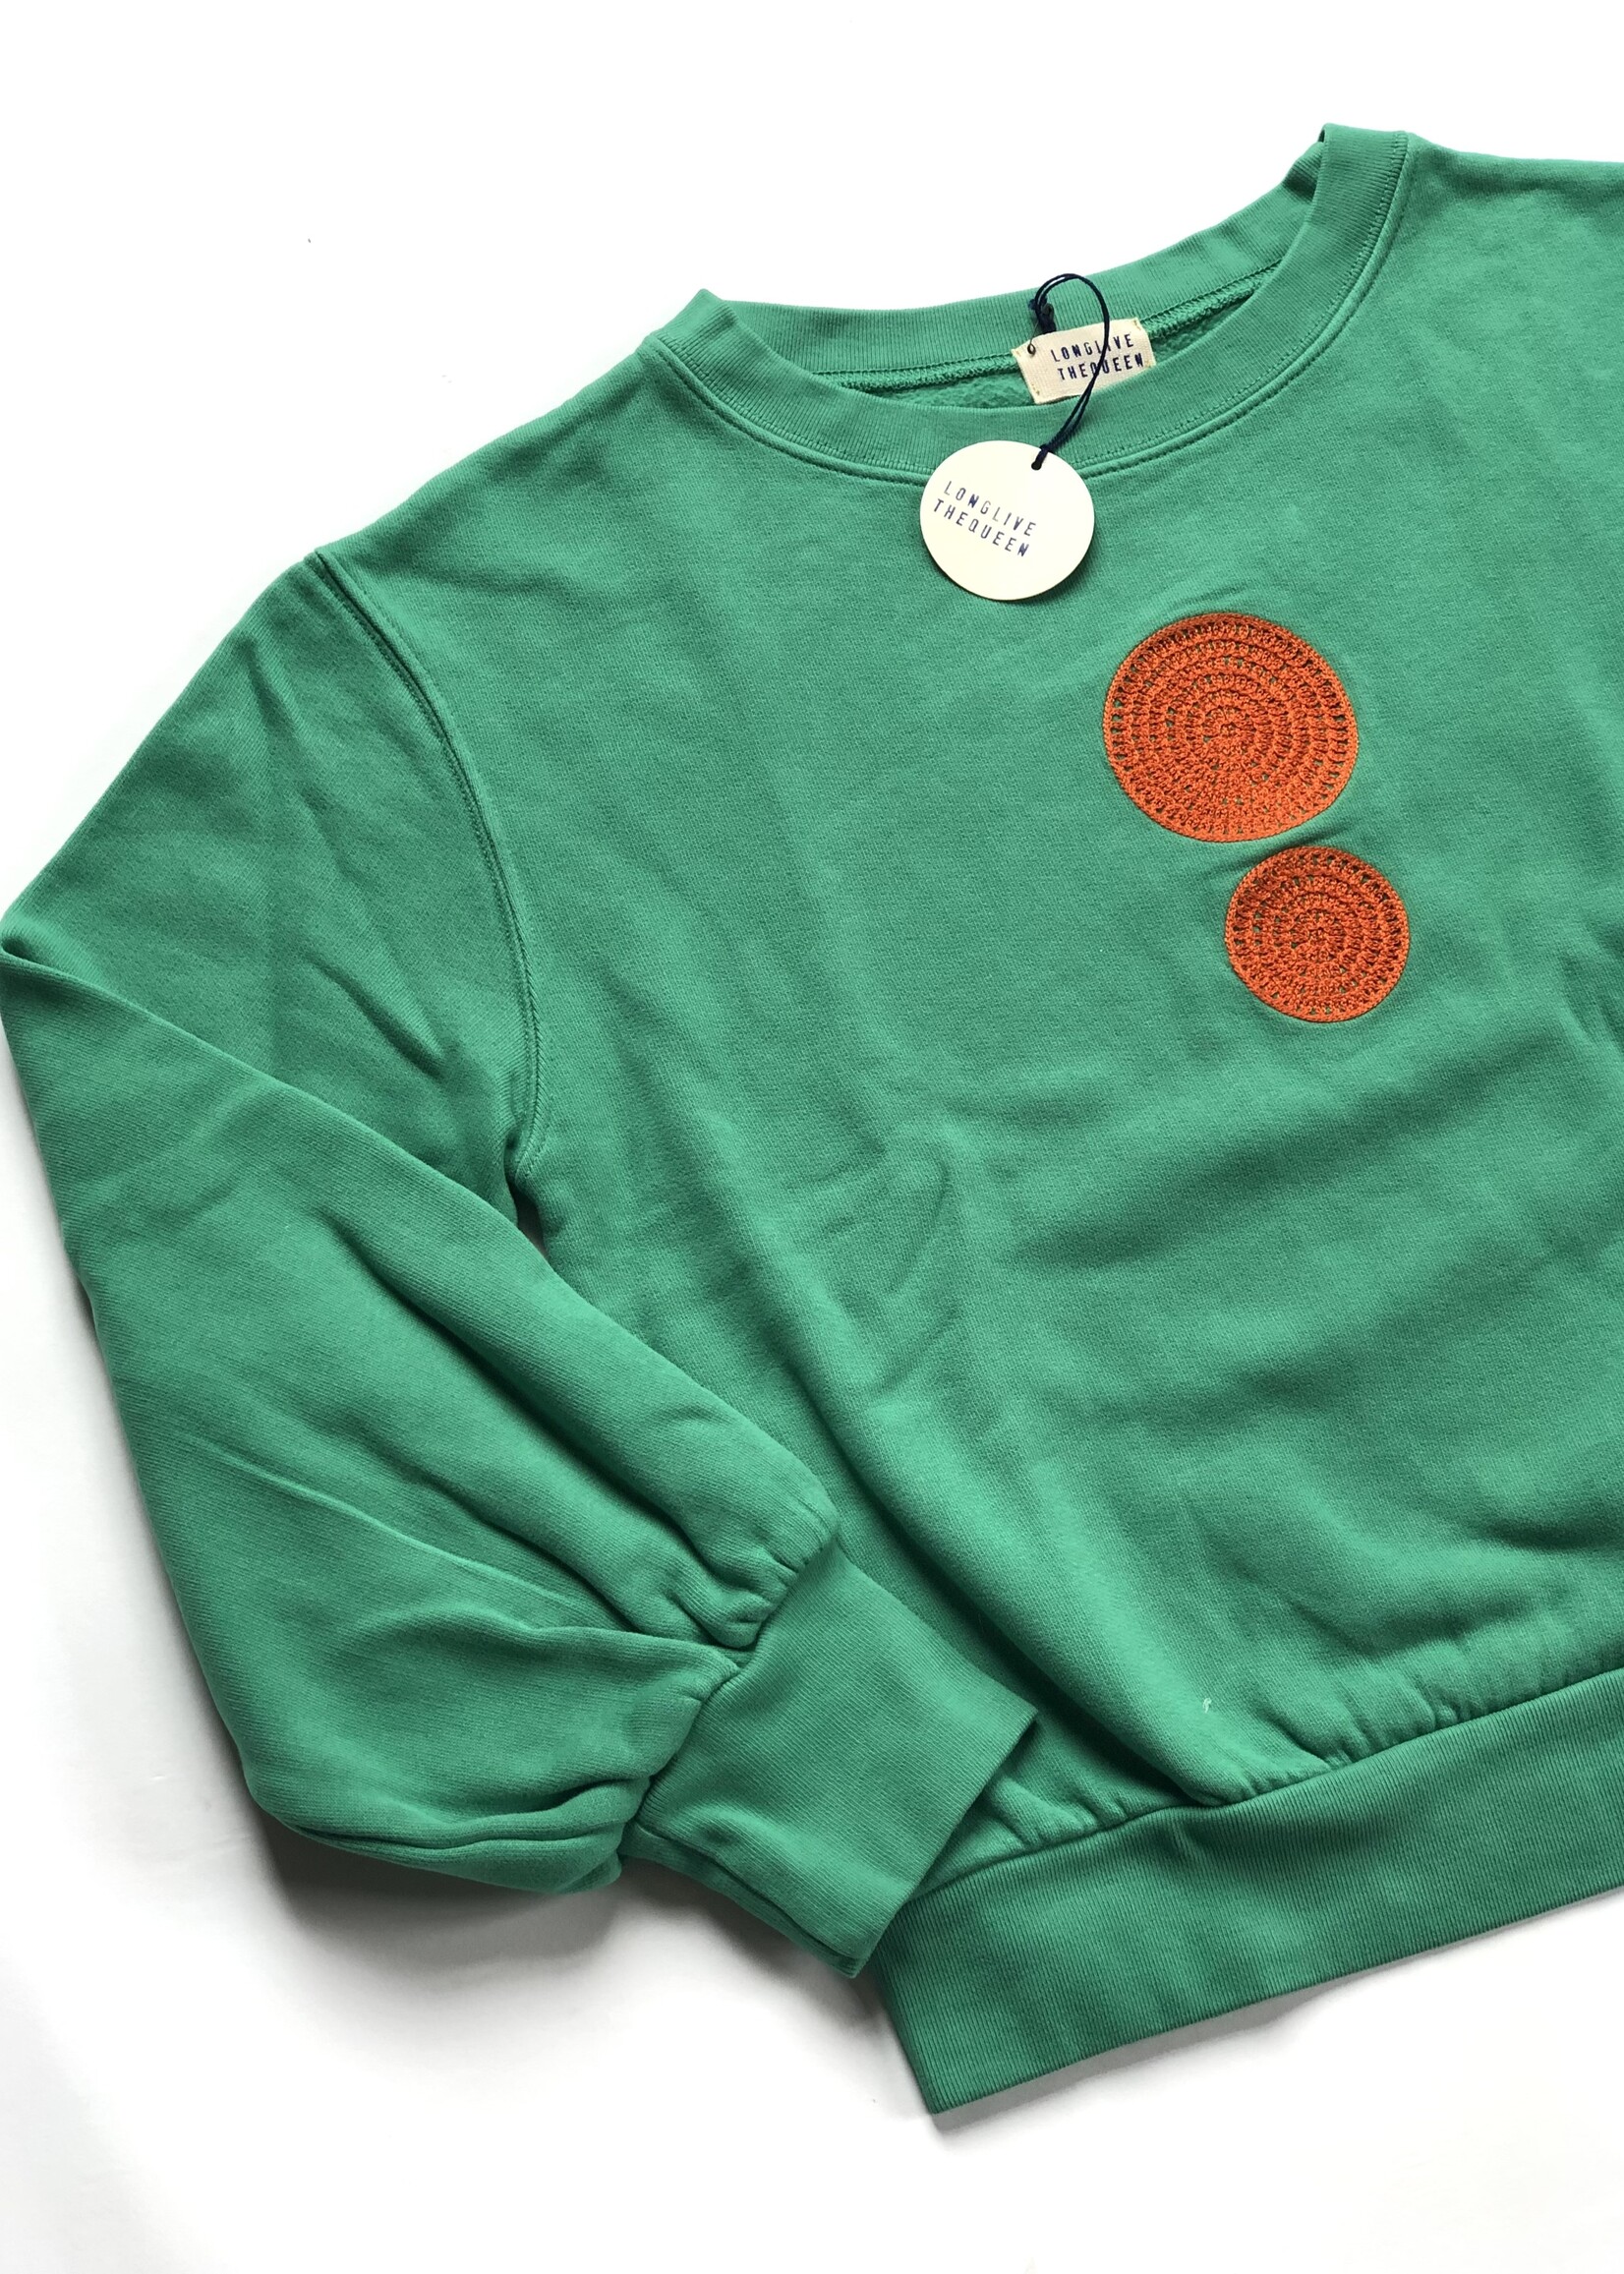 Long Live The Queen Green embroidered sweater 10y